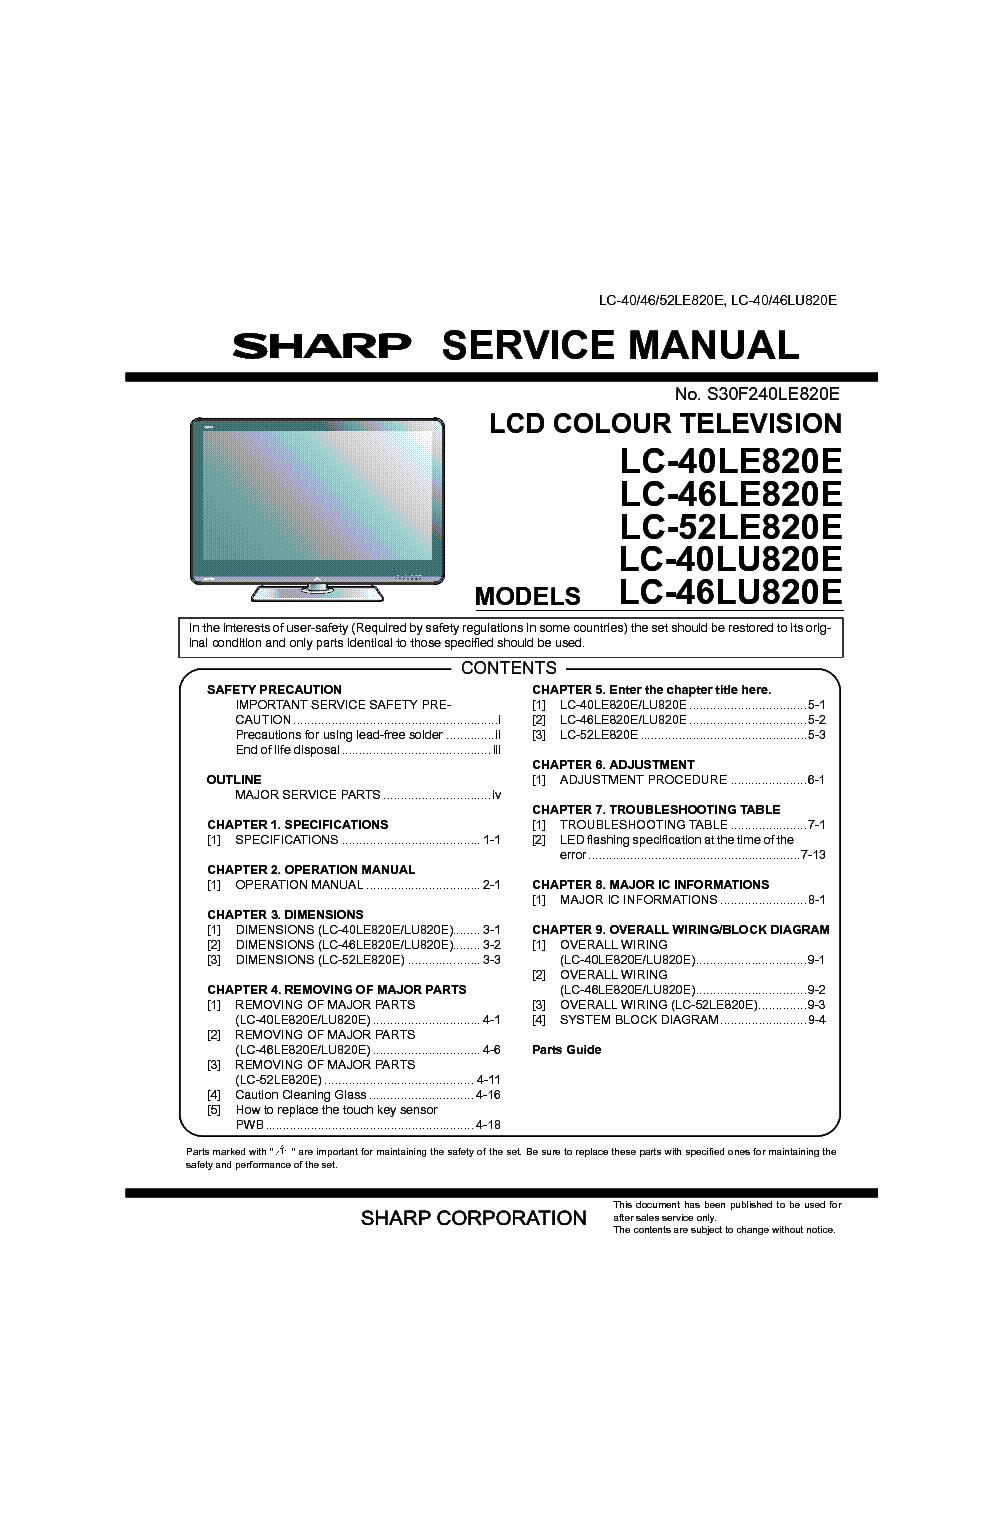 SHARP LC-40LE820E LC-46LE820E LC-52LE820E LC-40LU820E LC-46LU820E service manual (1st page)